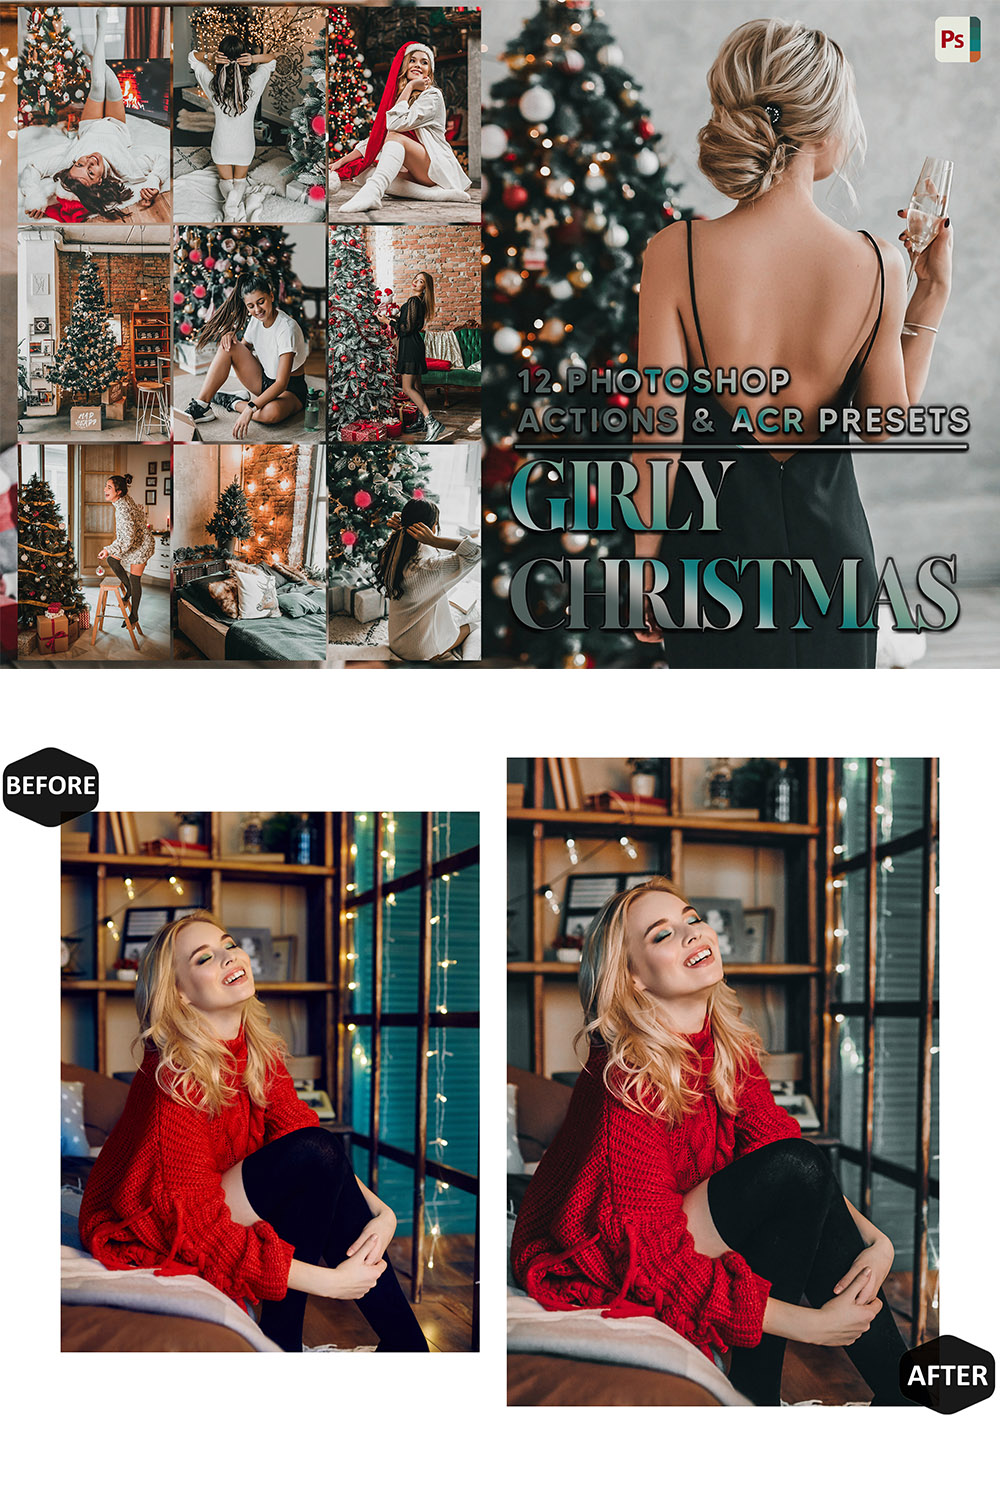 12 Photoshop Actions, Girly Christmas Ps Action, Holiday ACR Preset, Warm Xmas Ps Filter, Atn Portrait And Lifestyle Theme For Instagram, Blogger pinterest preview image.